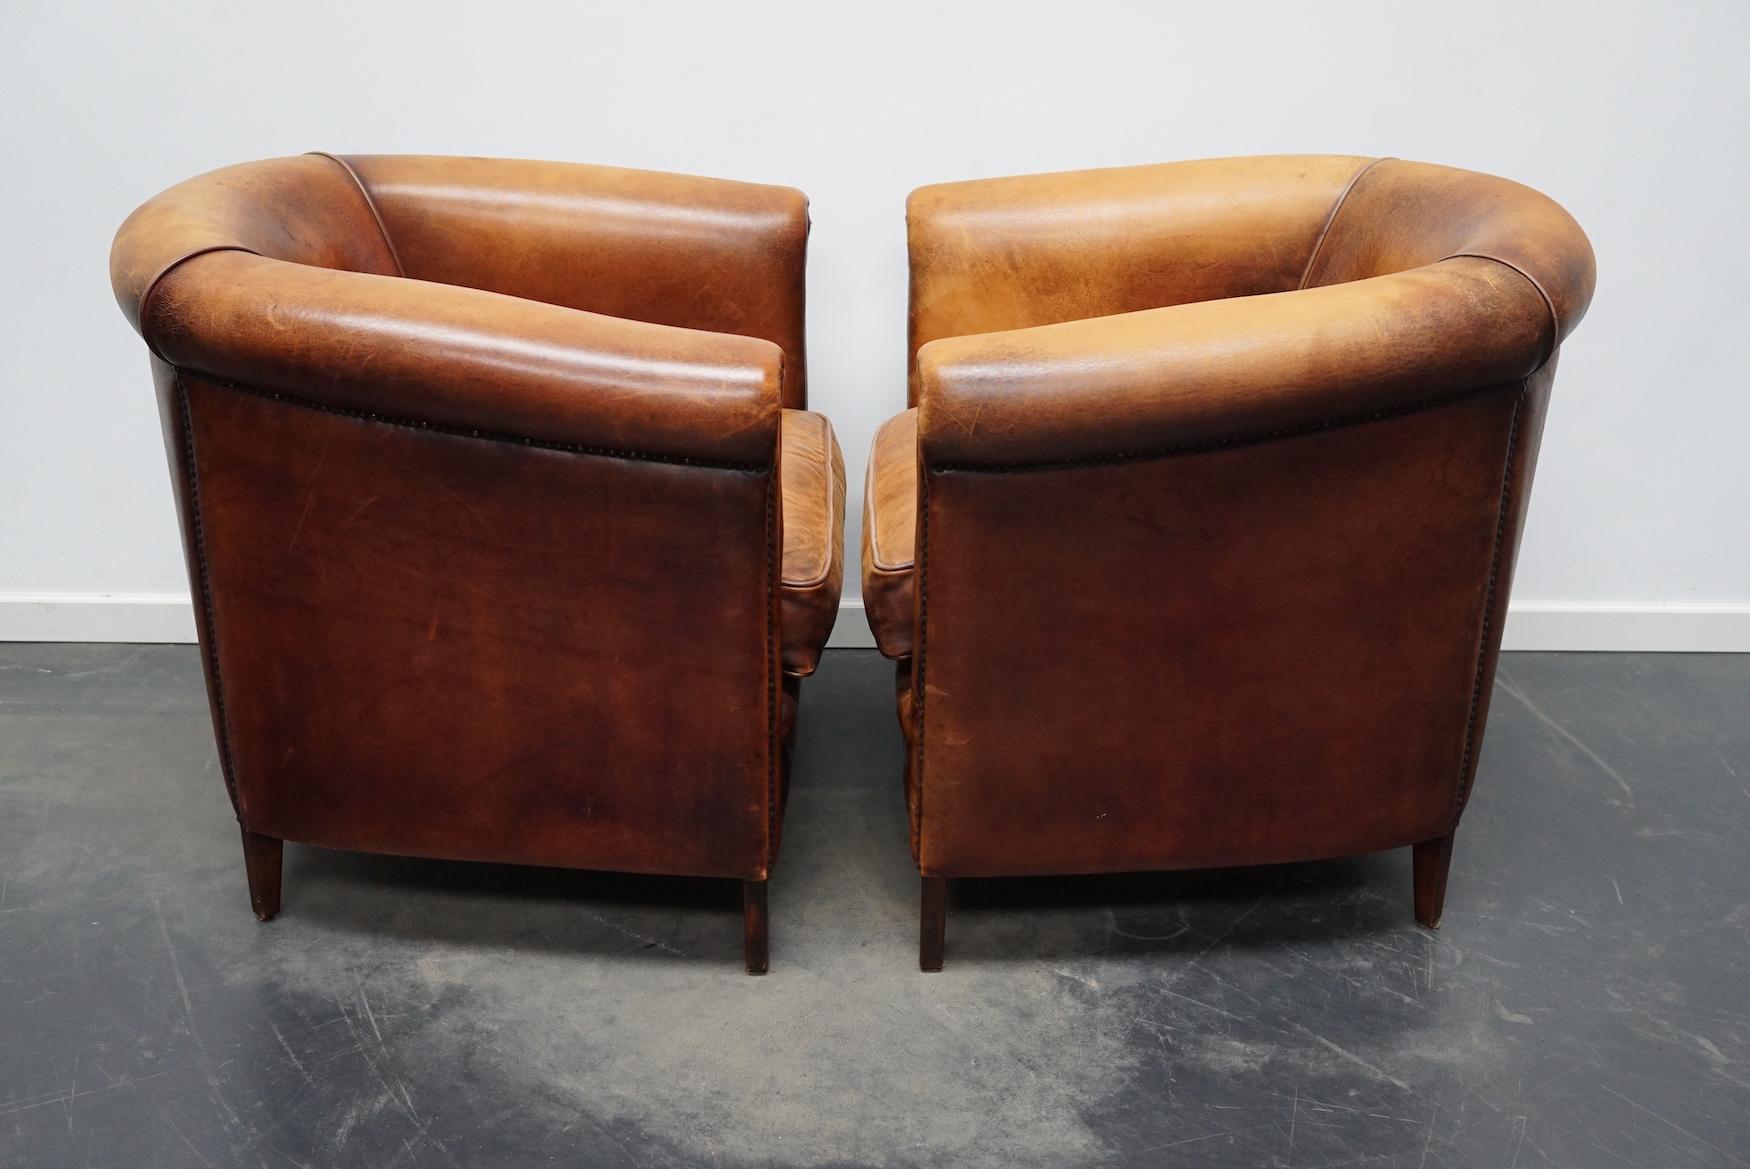 Vintage Dutch Cognac Colored Leather Club Chair, Set of 2 In Good Condition For Sale In Nijmegen, NL